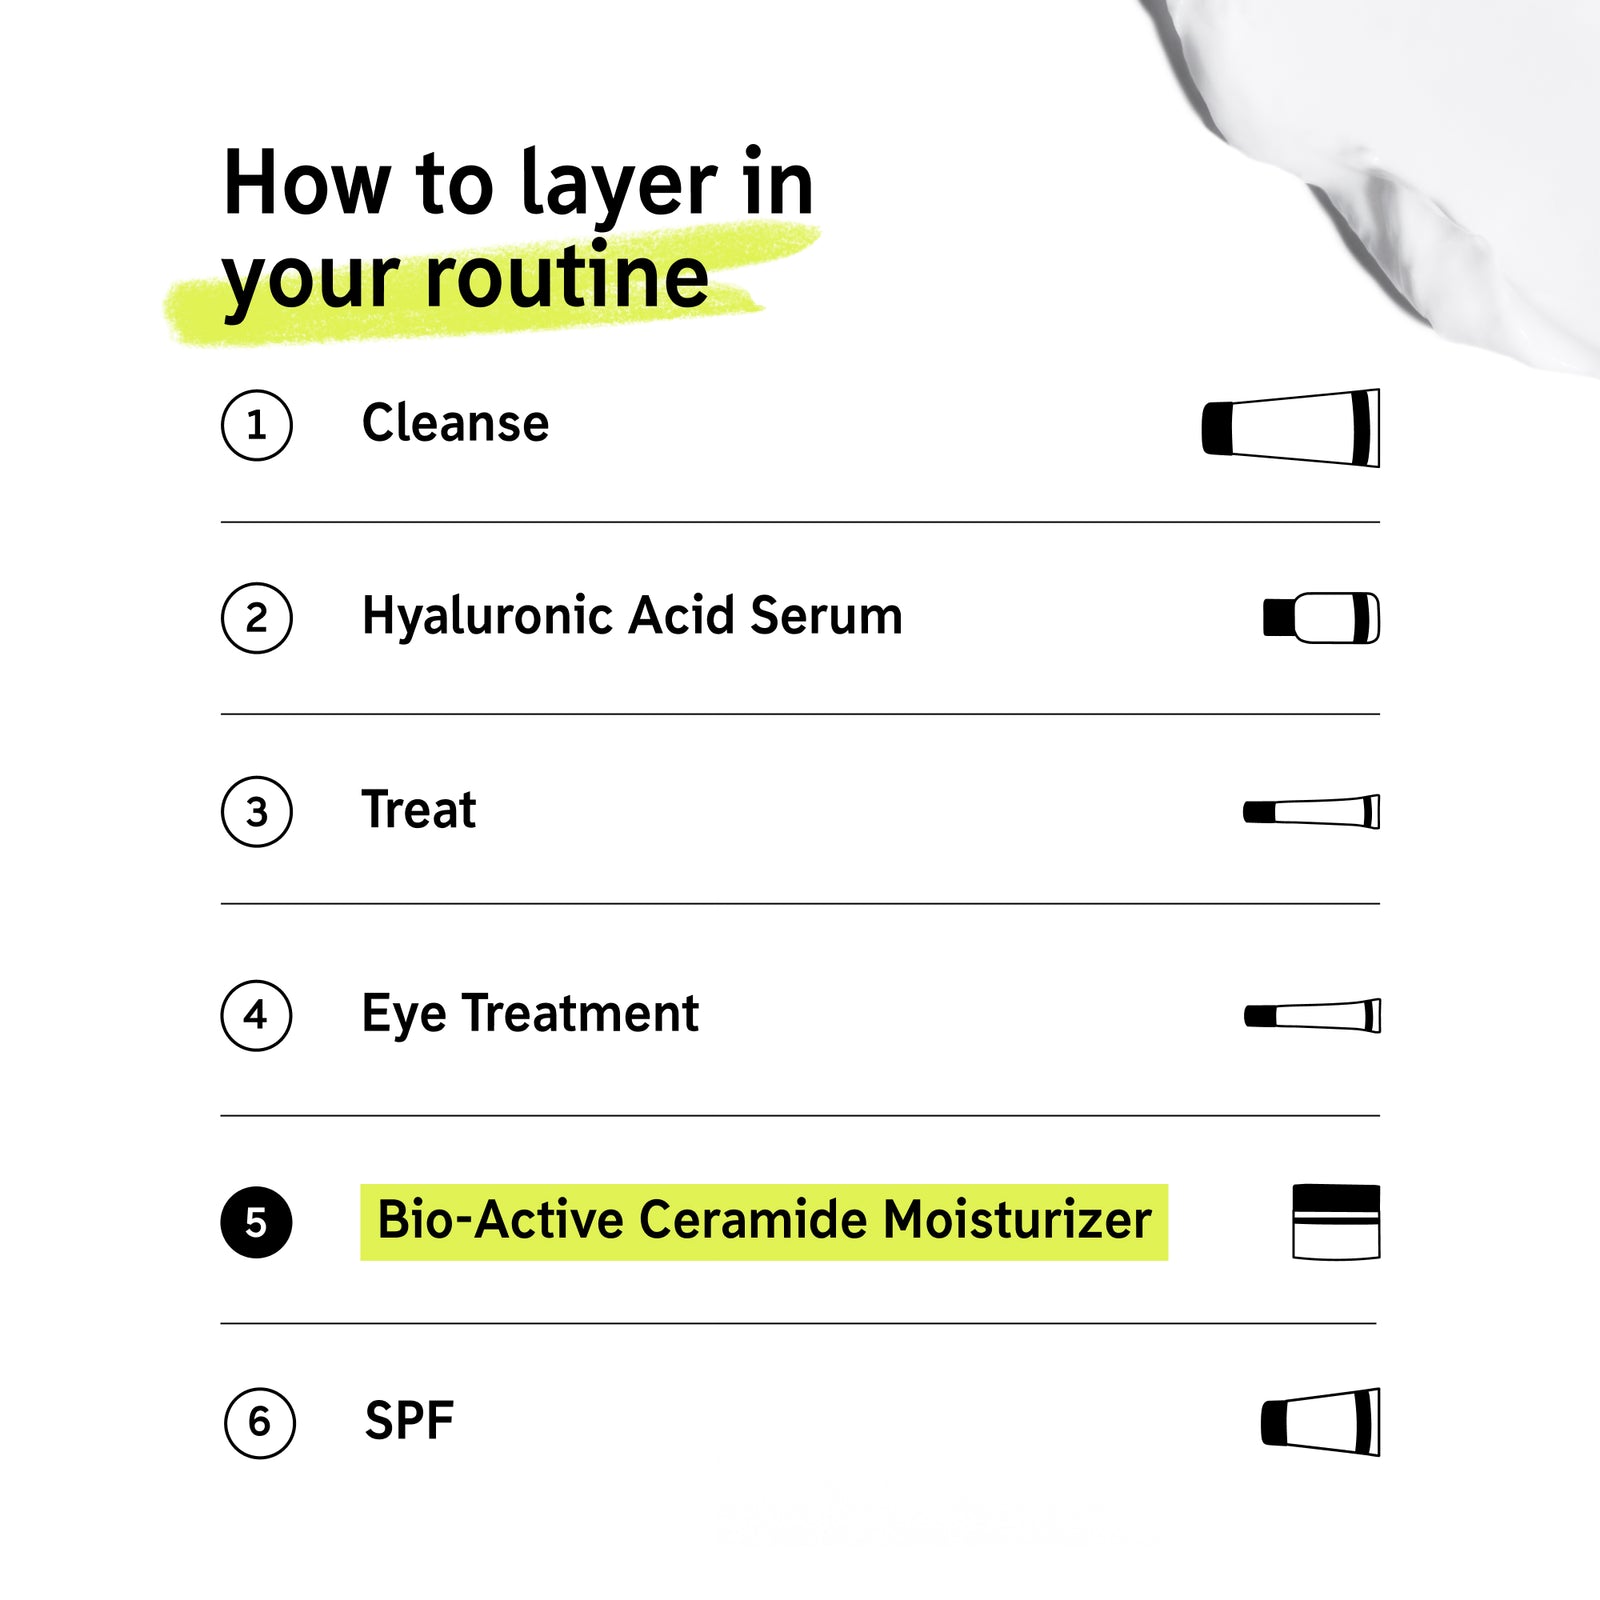 How to layer Bio-Active Ceramide Moisturizer in your routine